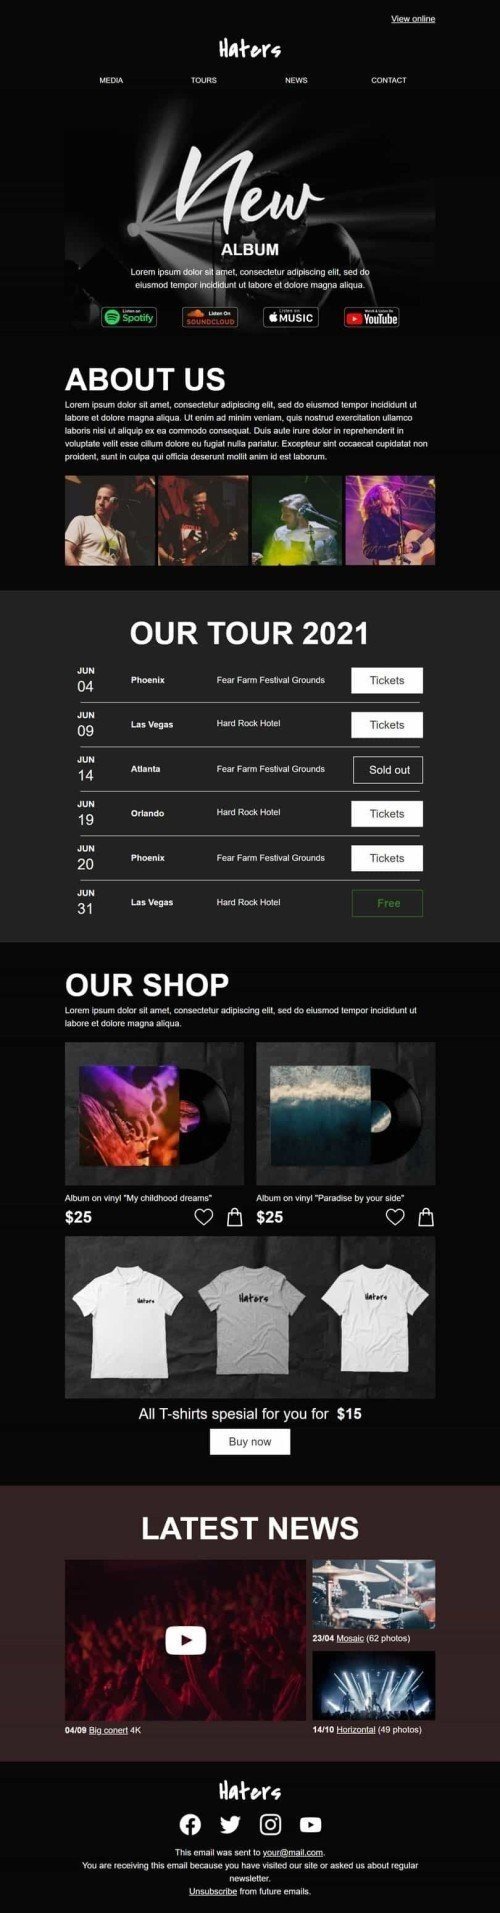 Promo Email Template "New album" for Music industry mobile view